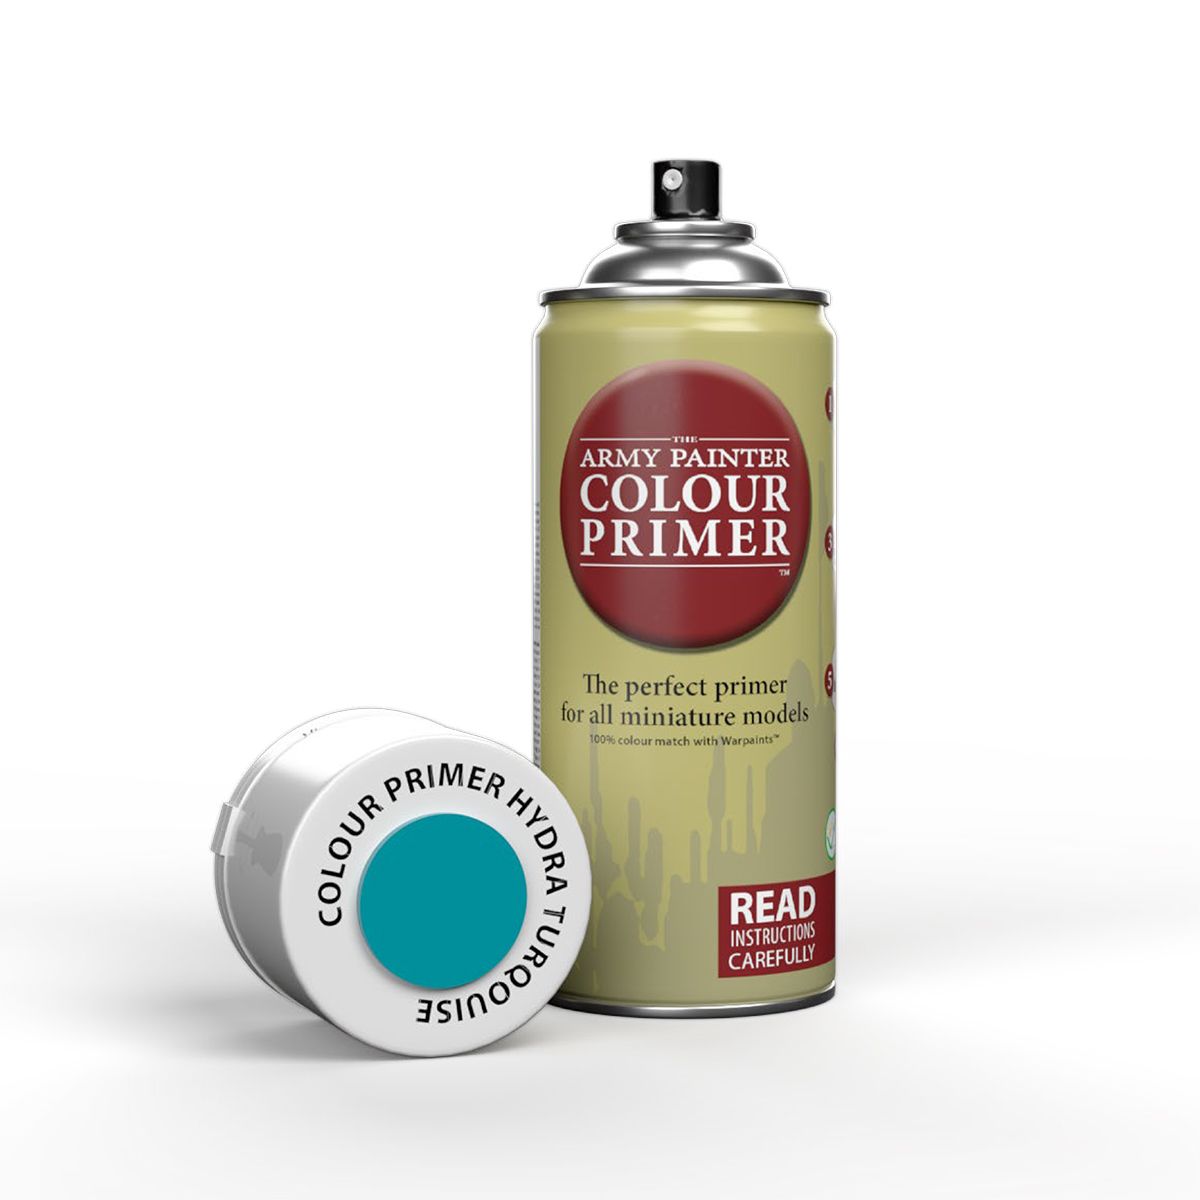 Army Painter Colour Primer - IN STORE PICKUP ONLY